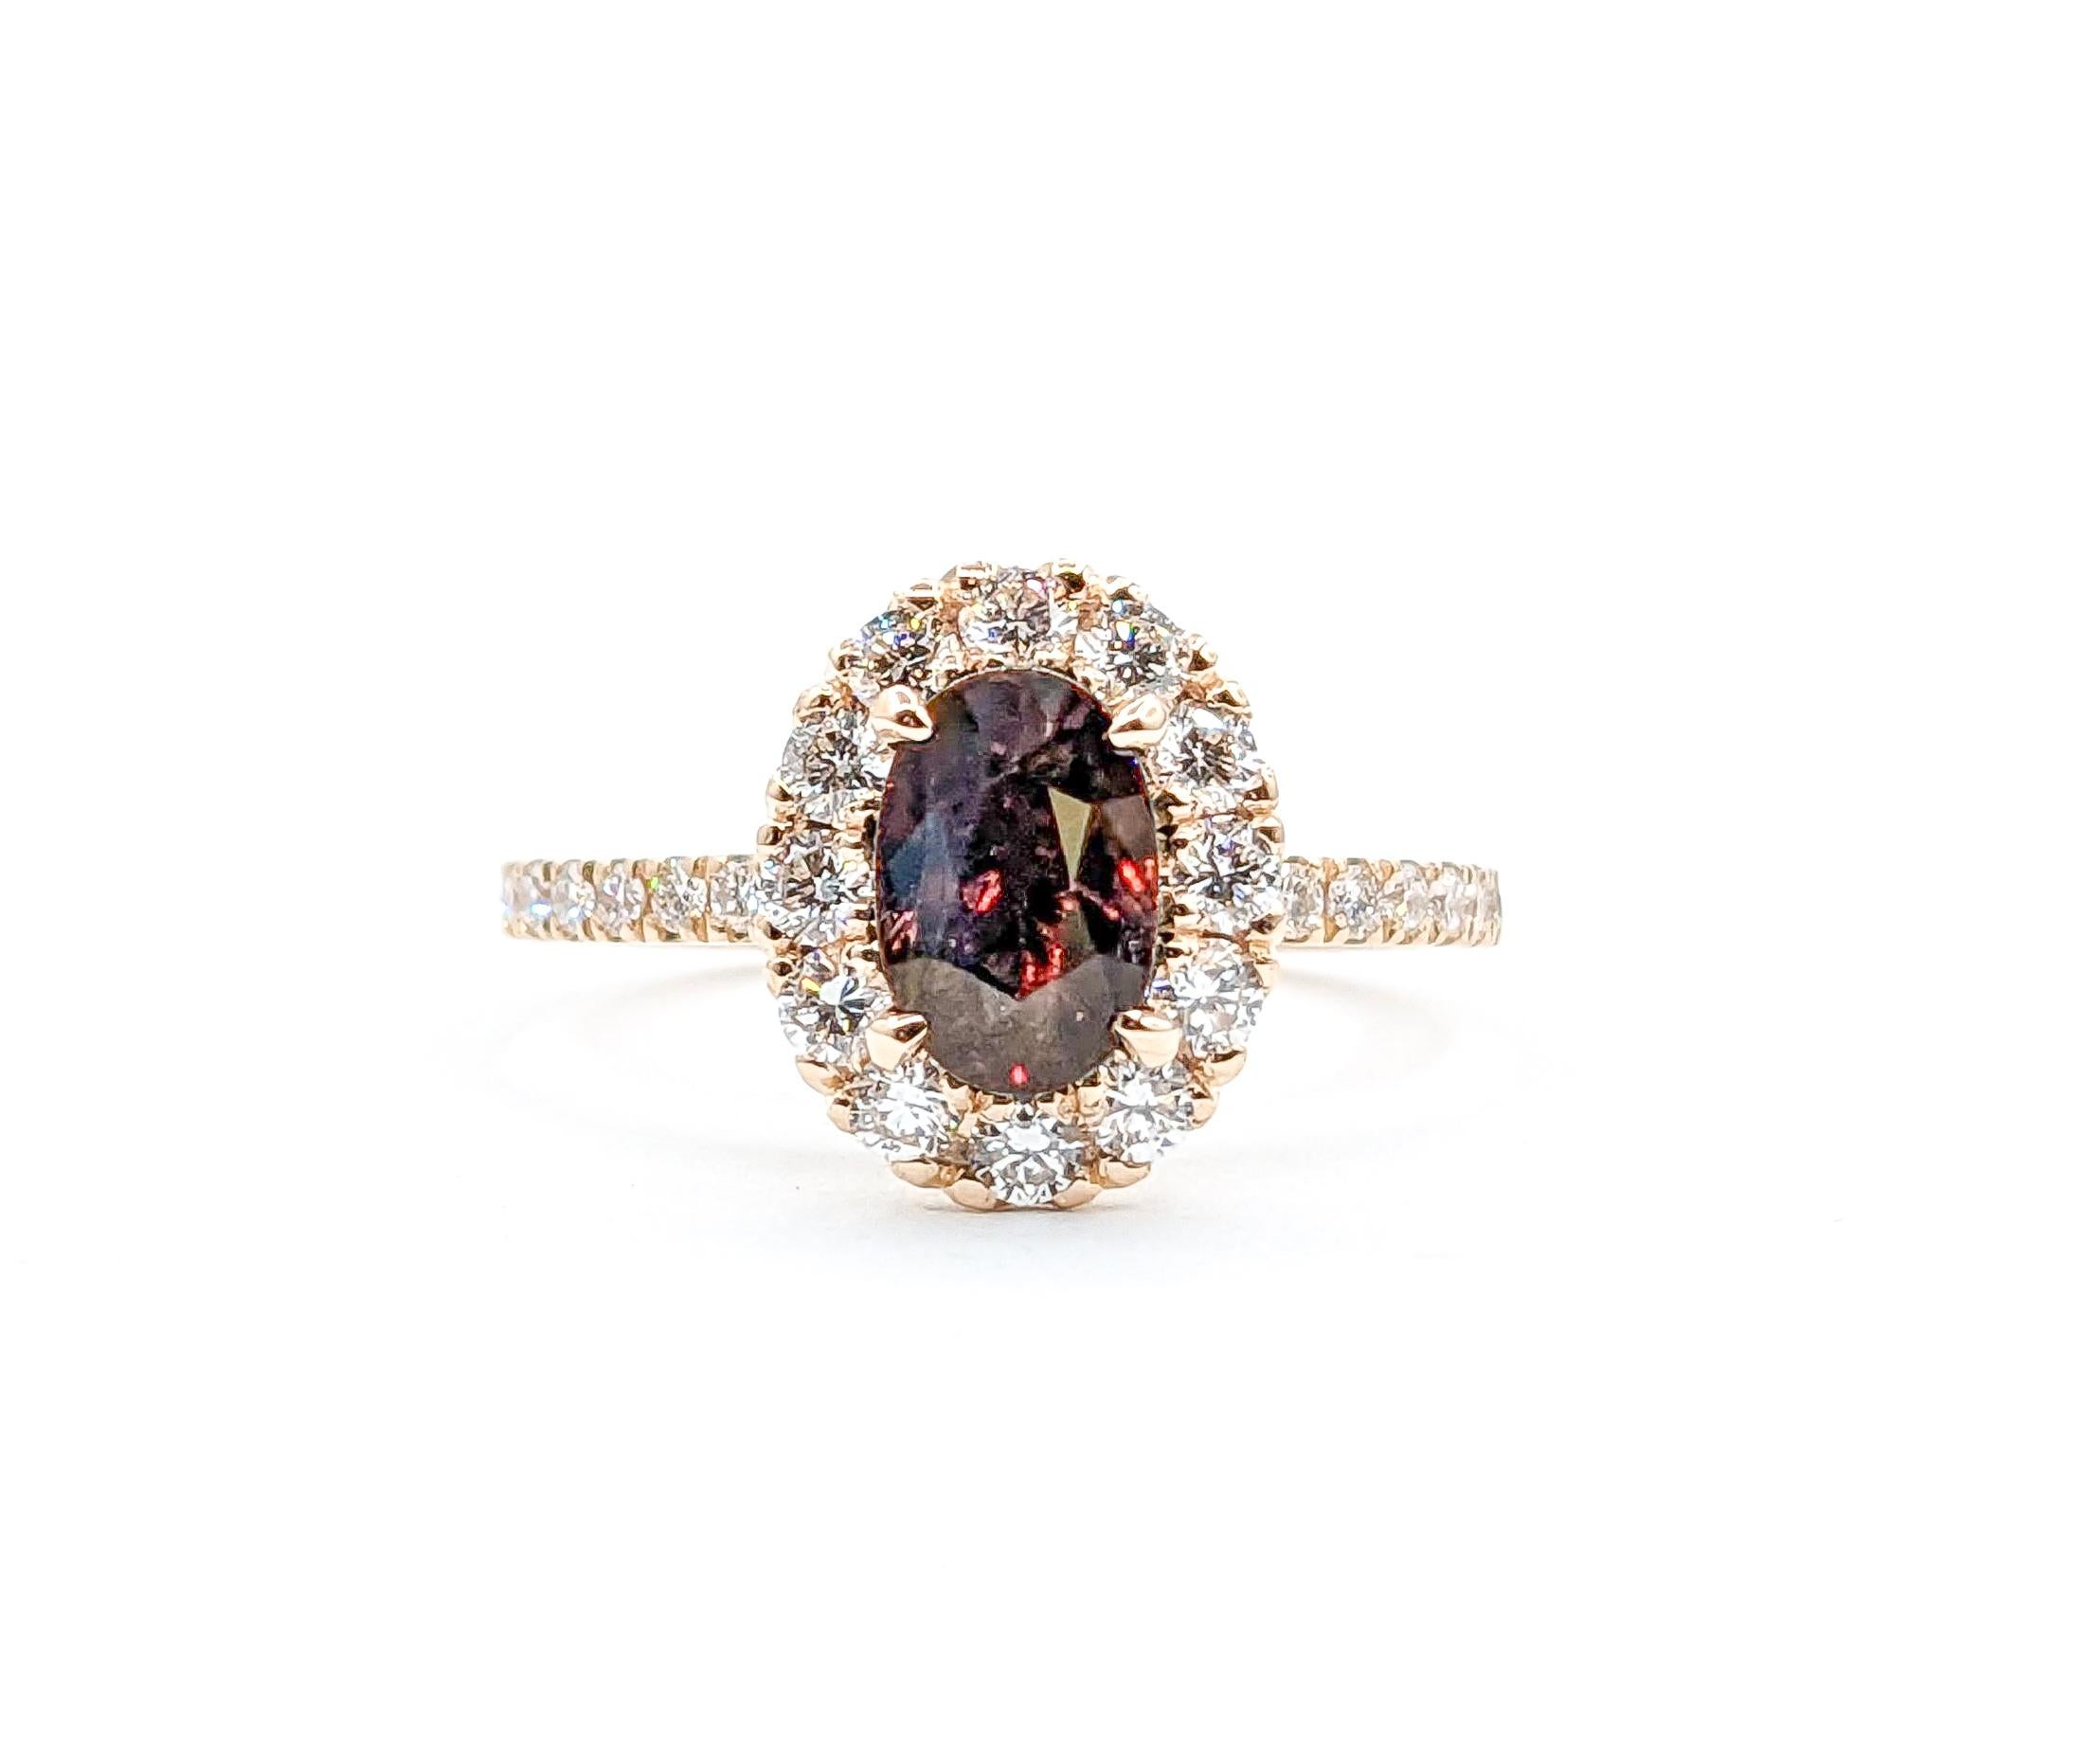 1.23ct Natural Madagascar Alexandrite & Diamond Ring in Rose Gold

Introducing this exquisite natural alexandrite ring, masterfully crafted in lustrous 14kr rose gold. At its heart lies a mesmerizing 1.23ct Natural (untreated) Madagascar